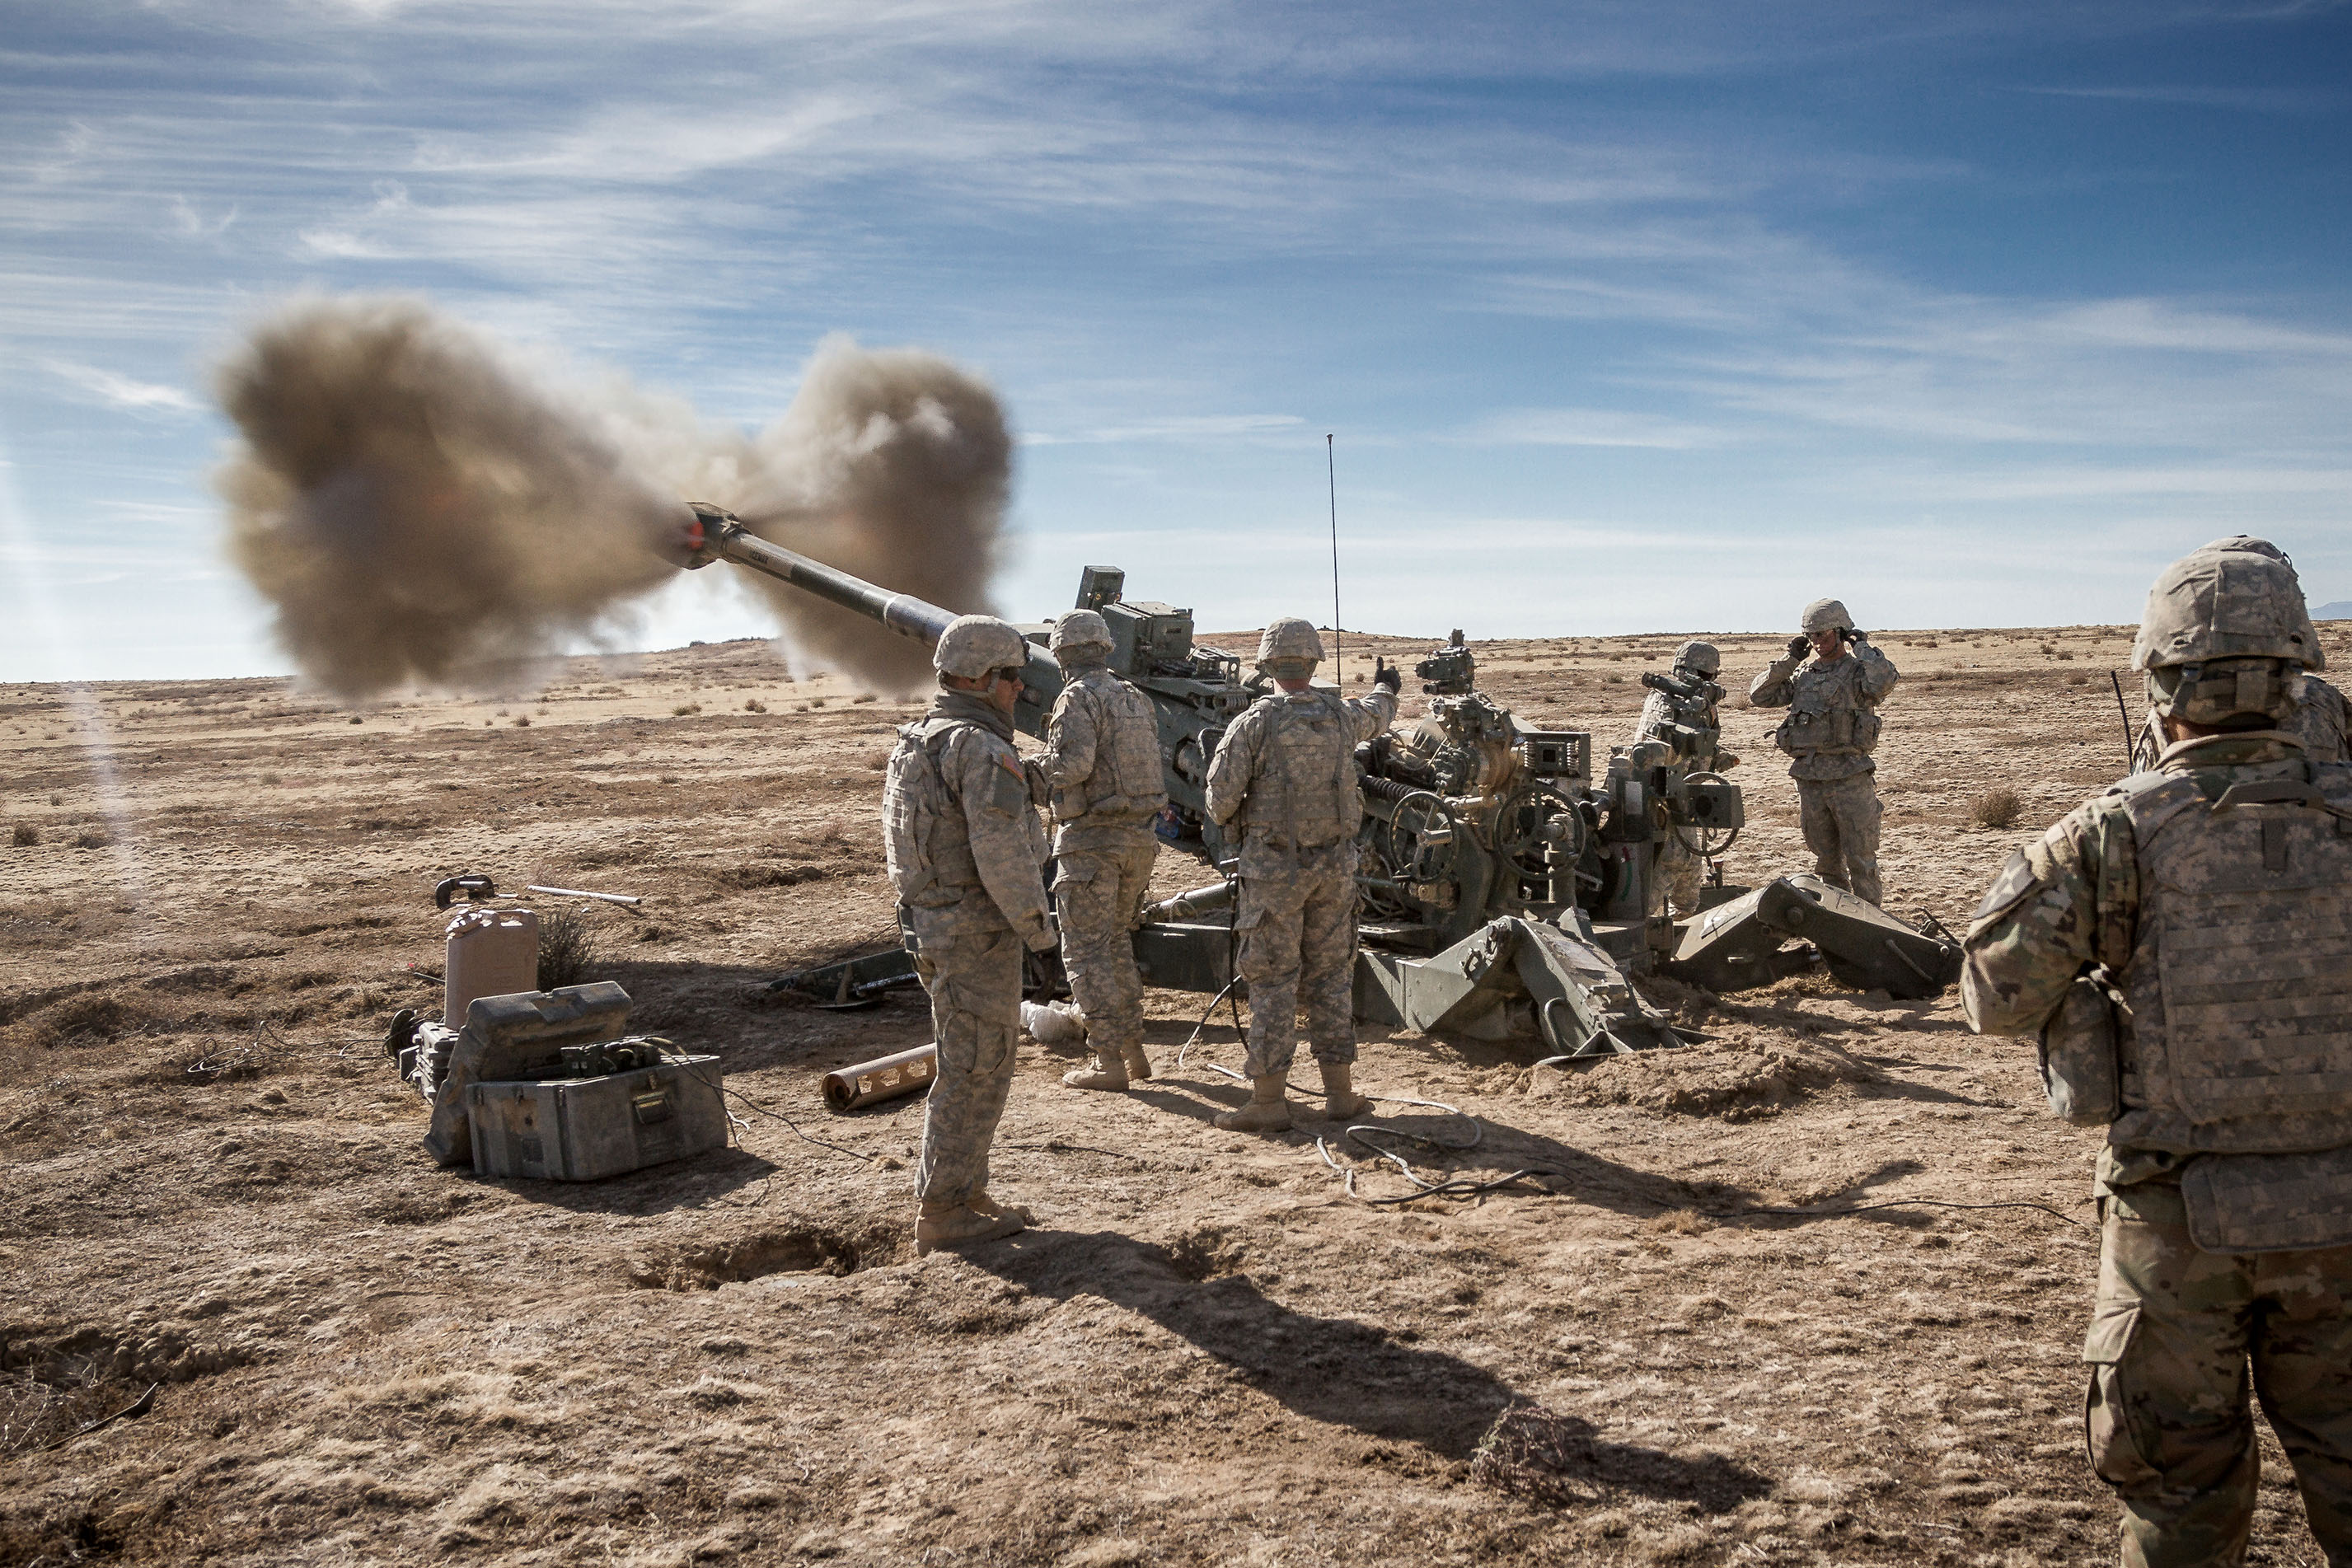 Soldiers assigned to 2nd Infantry Division Artillery, 7th Infantry Division (ID) fire an M777 155 mm howitzer at Orchard Combat Training Center, Idaho, in October 2016. They were part of a group of more than 1,000 7th ID Soldiers participating in Raptor Fury, a training exercise to validate the 16th Combat Aviation Brigade's mission readiness. PEO Ammunition is exploring several new ammunition capabilities that will improve the lethality of 155 mm artillery while minimizing its impact on friendly troops and noncombatants. (Photo by Capt. Brian Harris, 16th Combat Aviation Brigade)